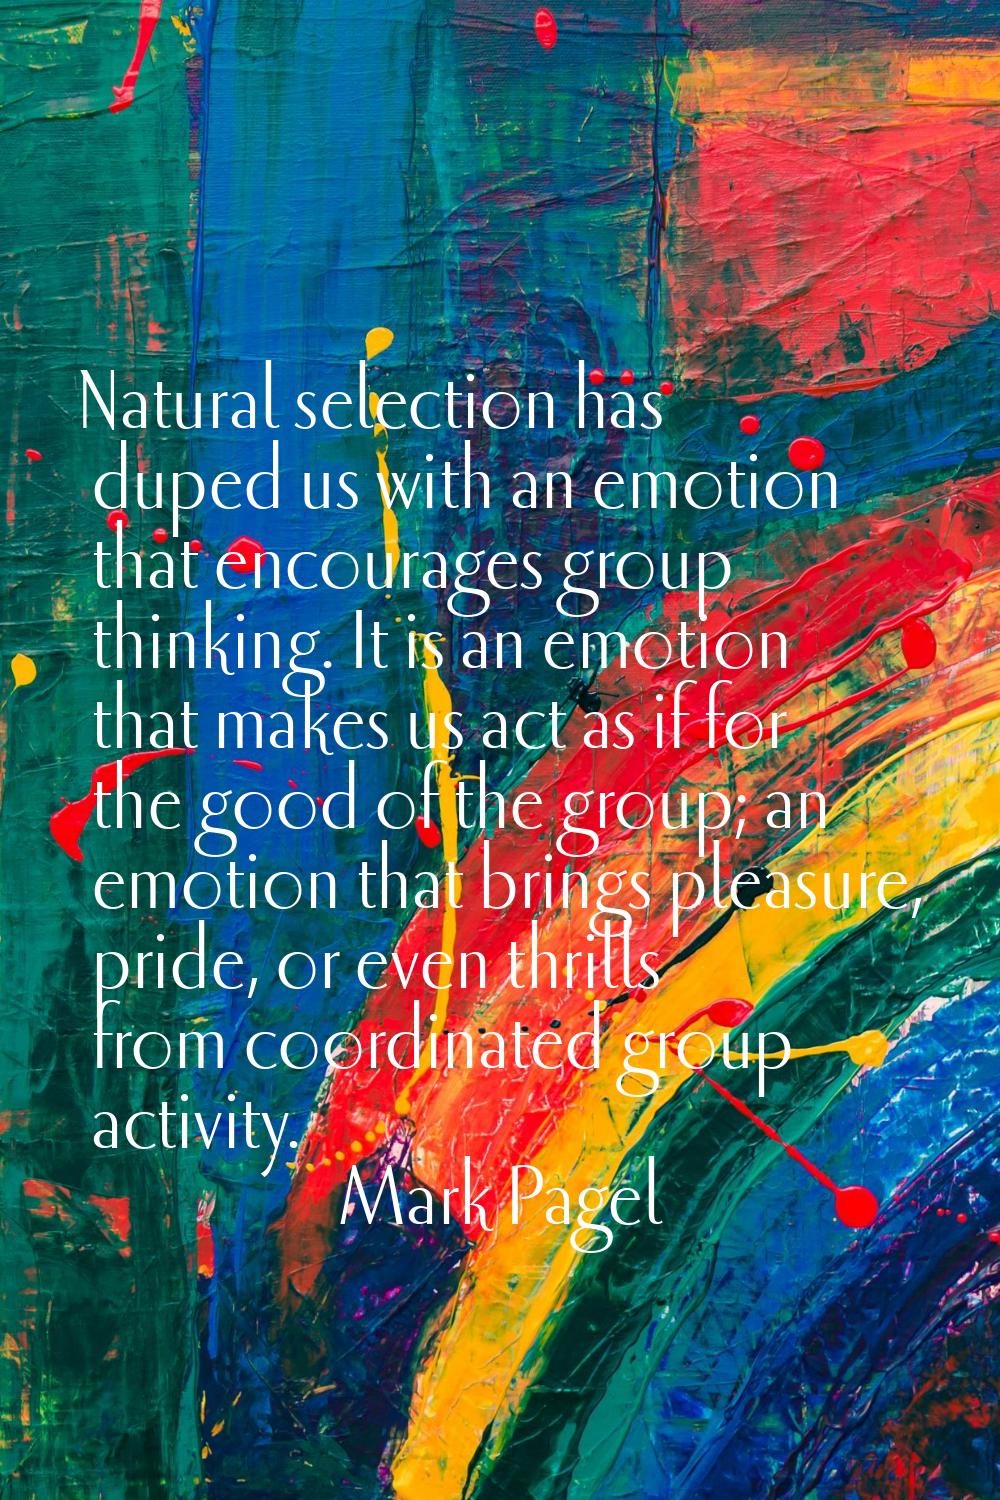 Natural selection has duped us with an emotion that encourages group thinking. It is an emotion tha